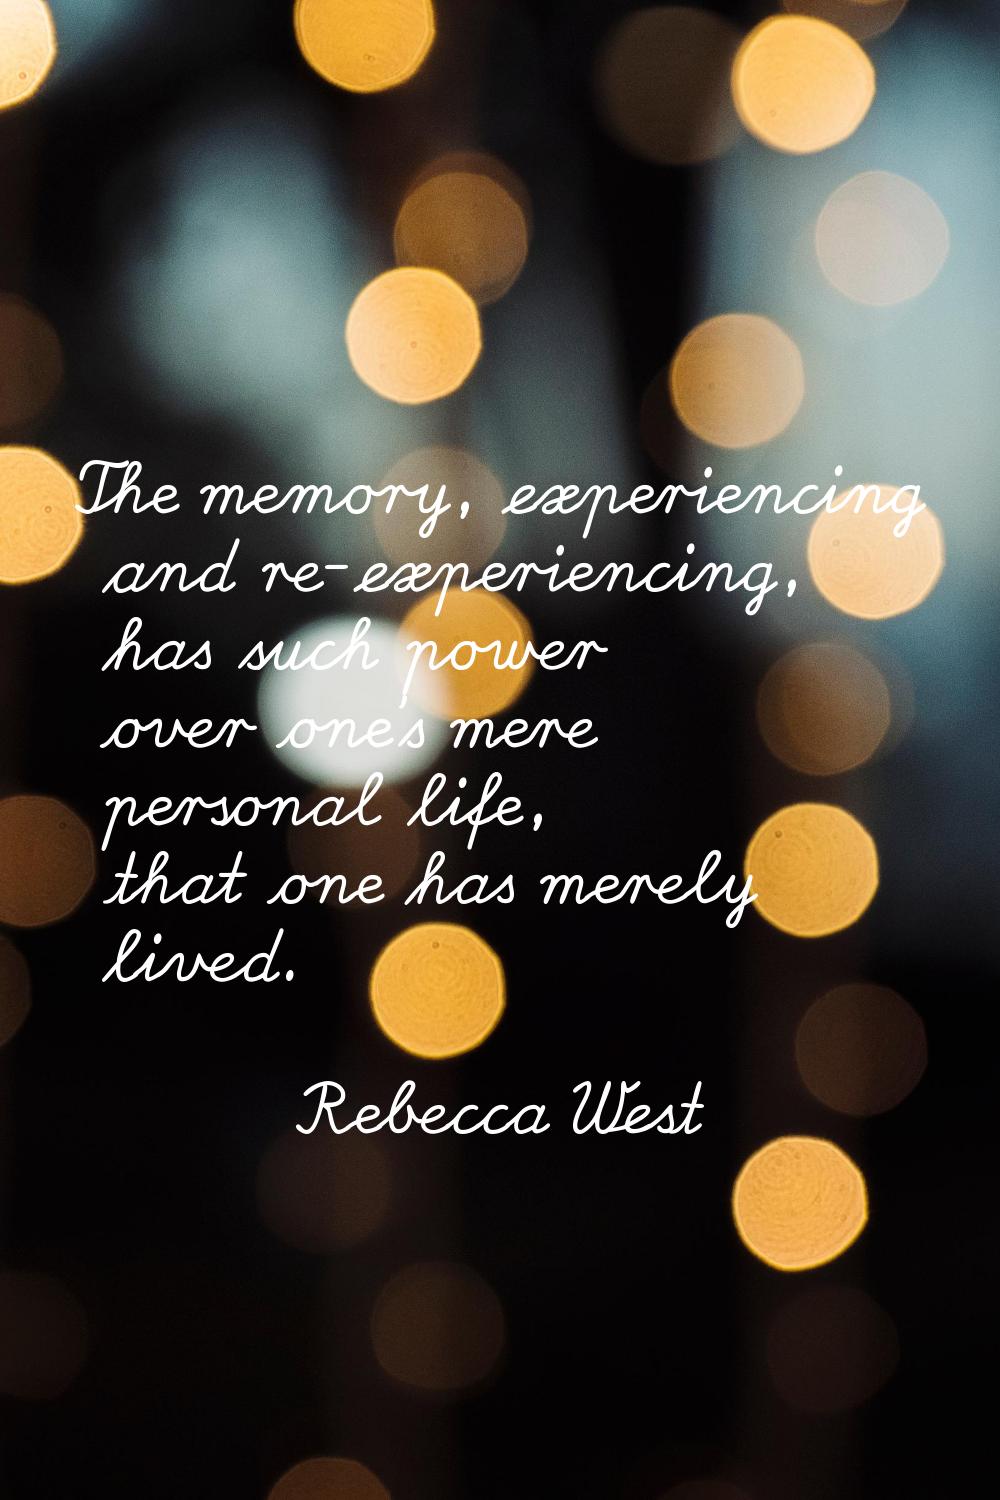 The memory, experiencing and re-experiencing, has such power over one's mere personal life, that on